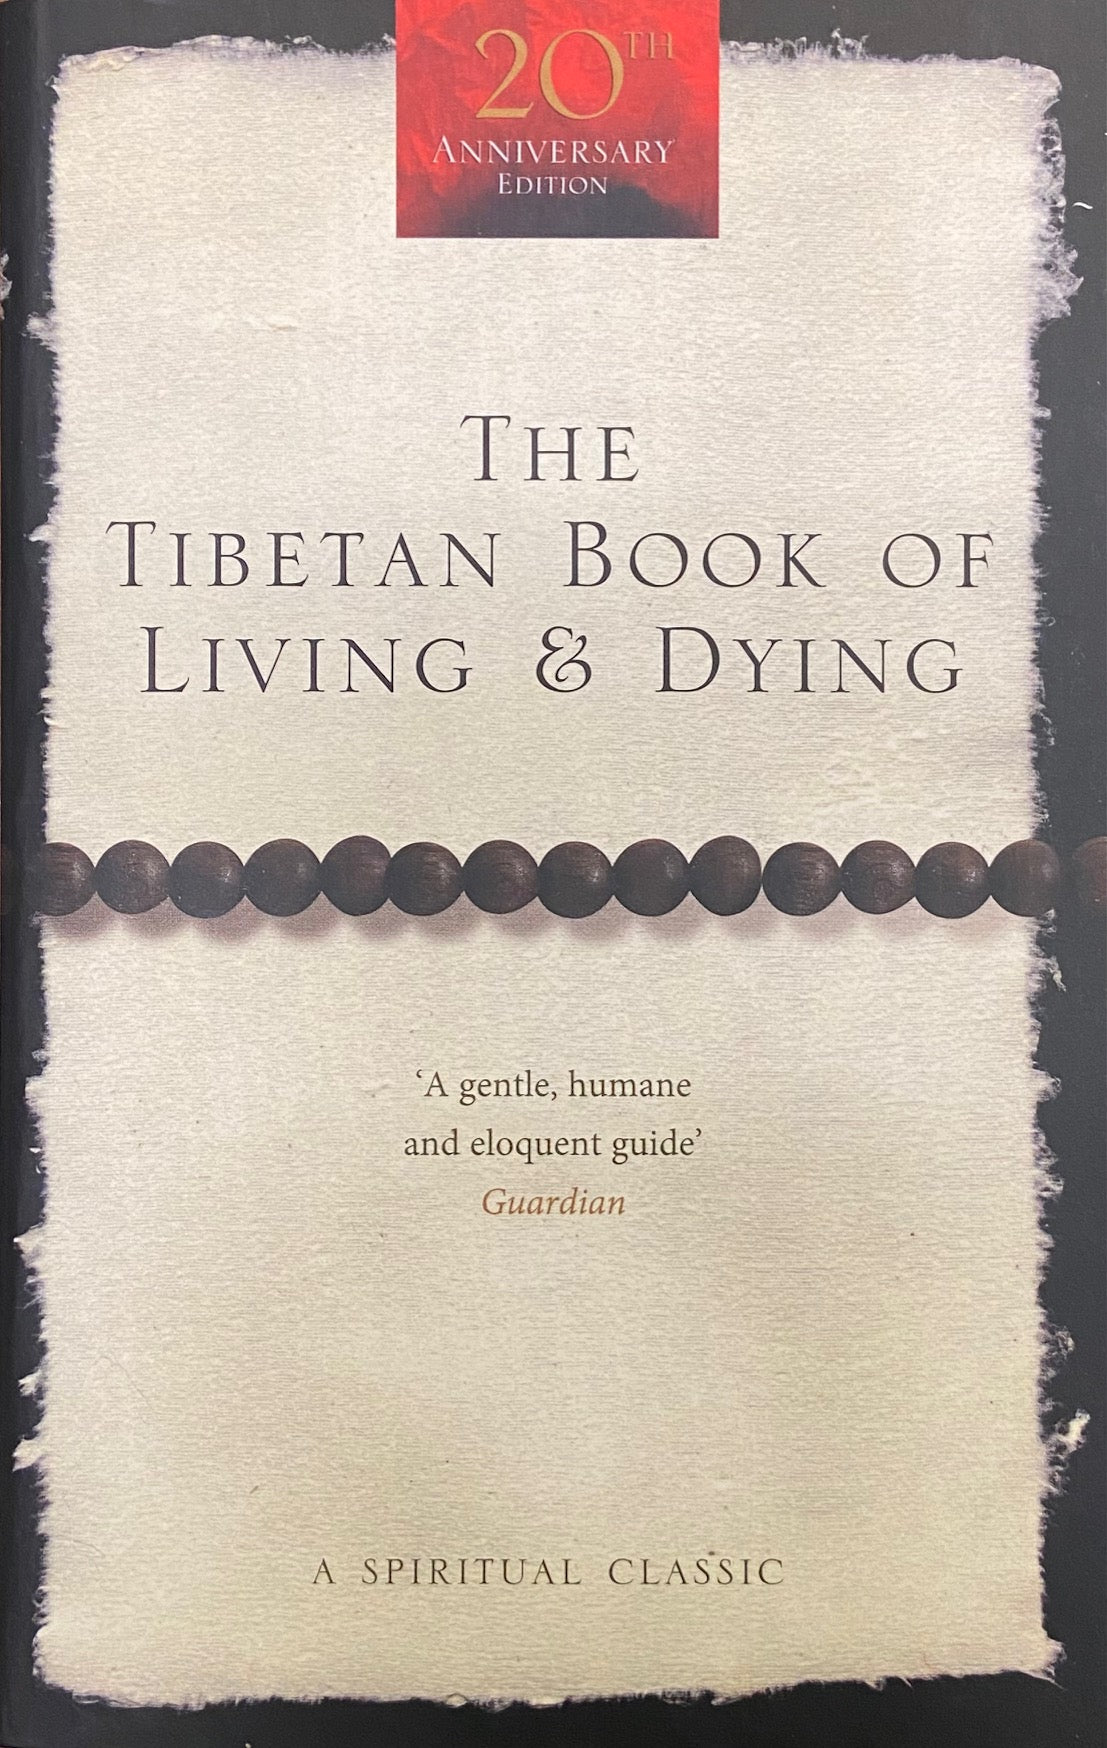 The Tibetan Book of Living and Dying Edited by Patrick Gaffney & Andrew Harvey